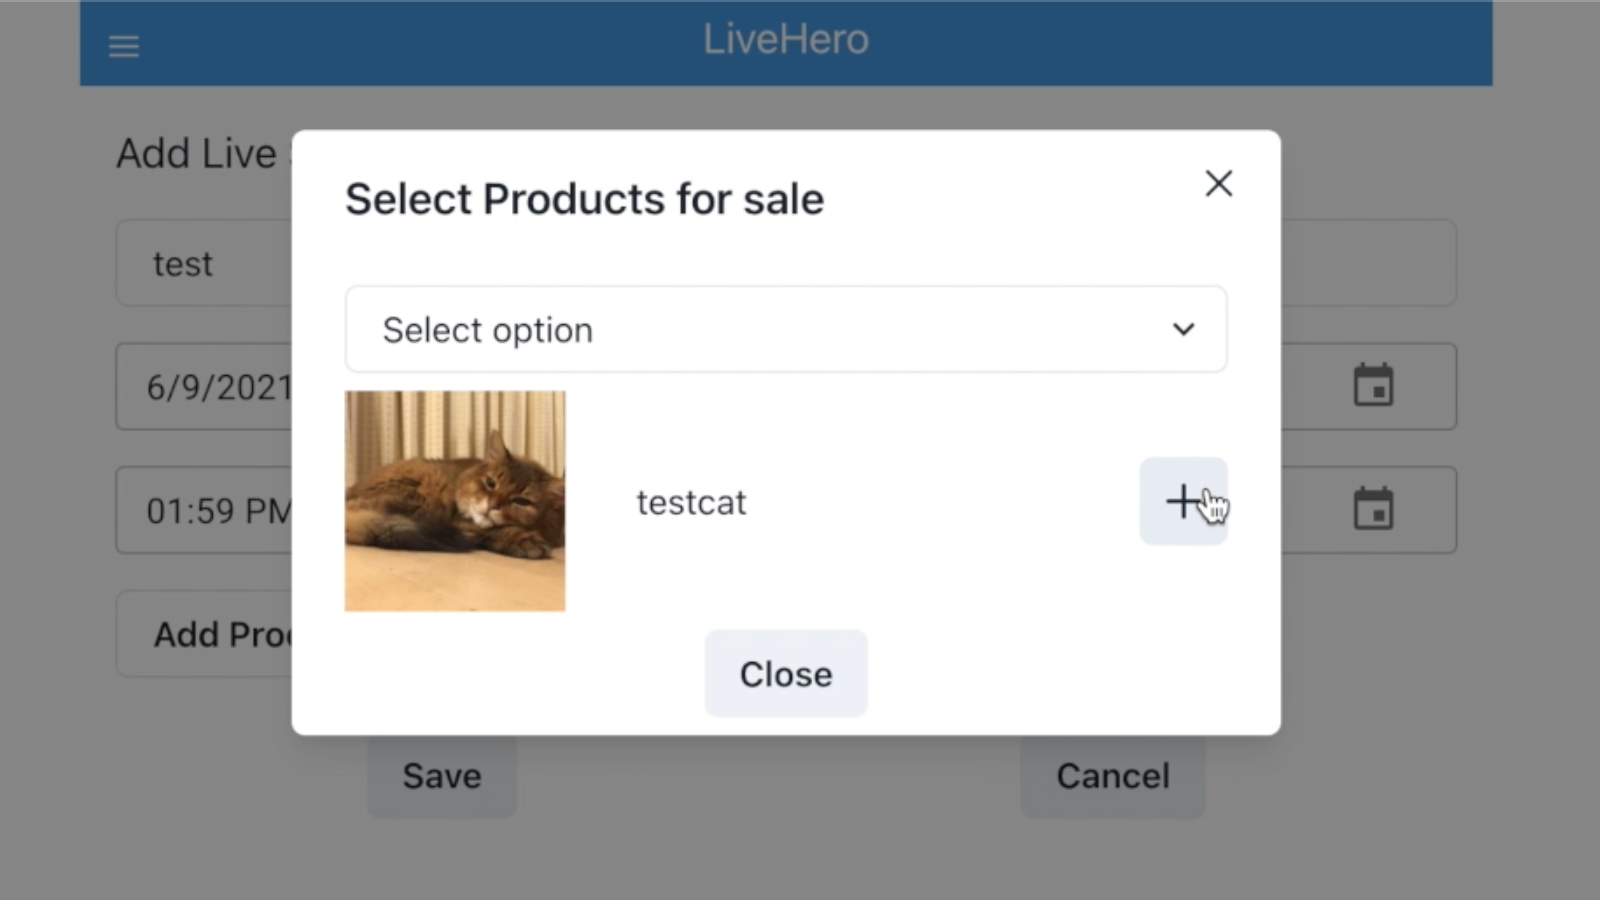 You can choose your product to display at the Live Streaming.